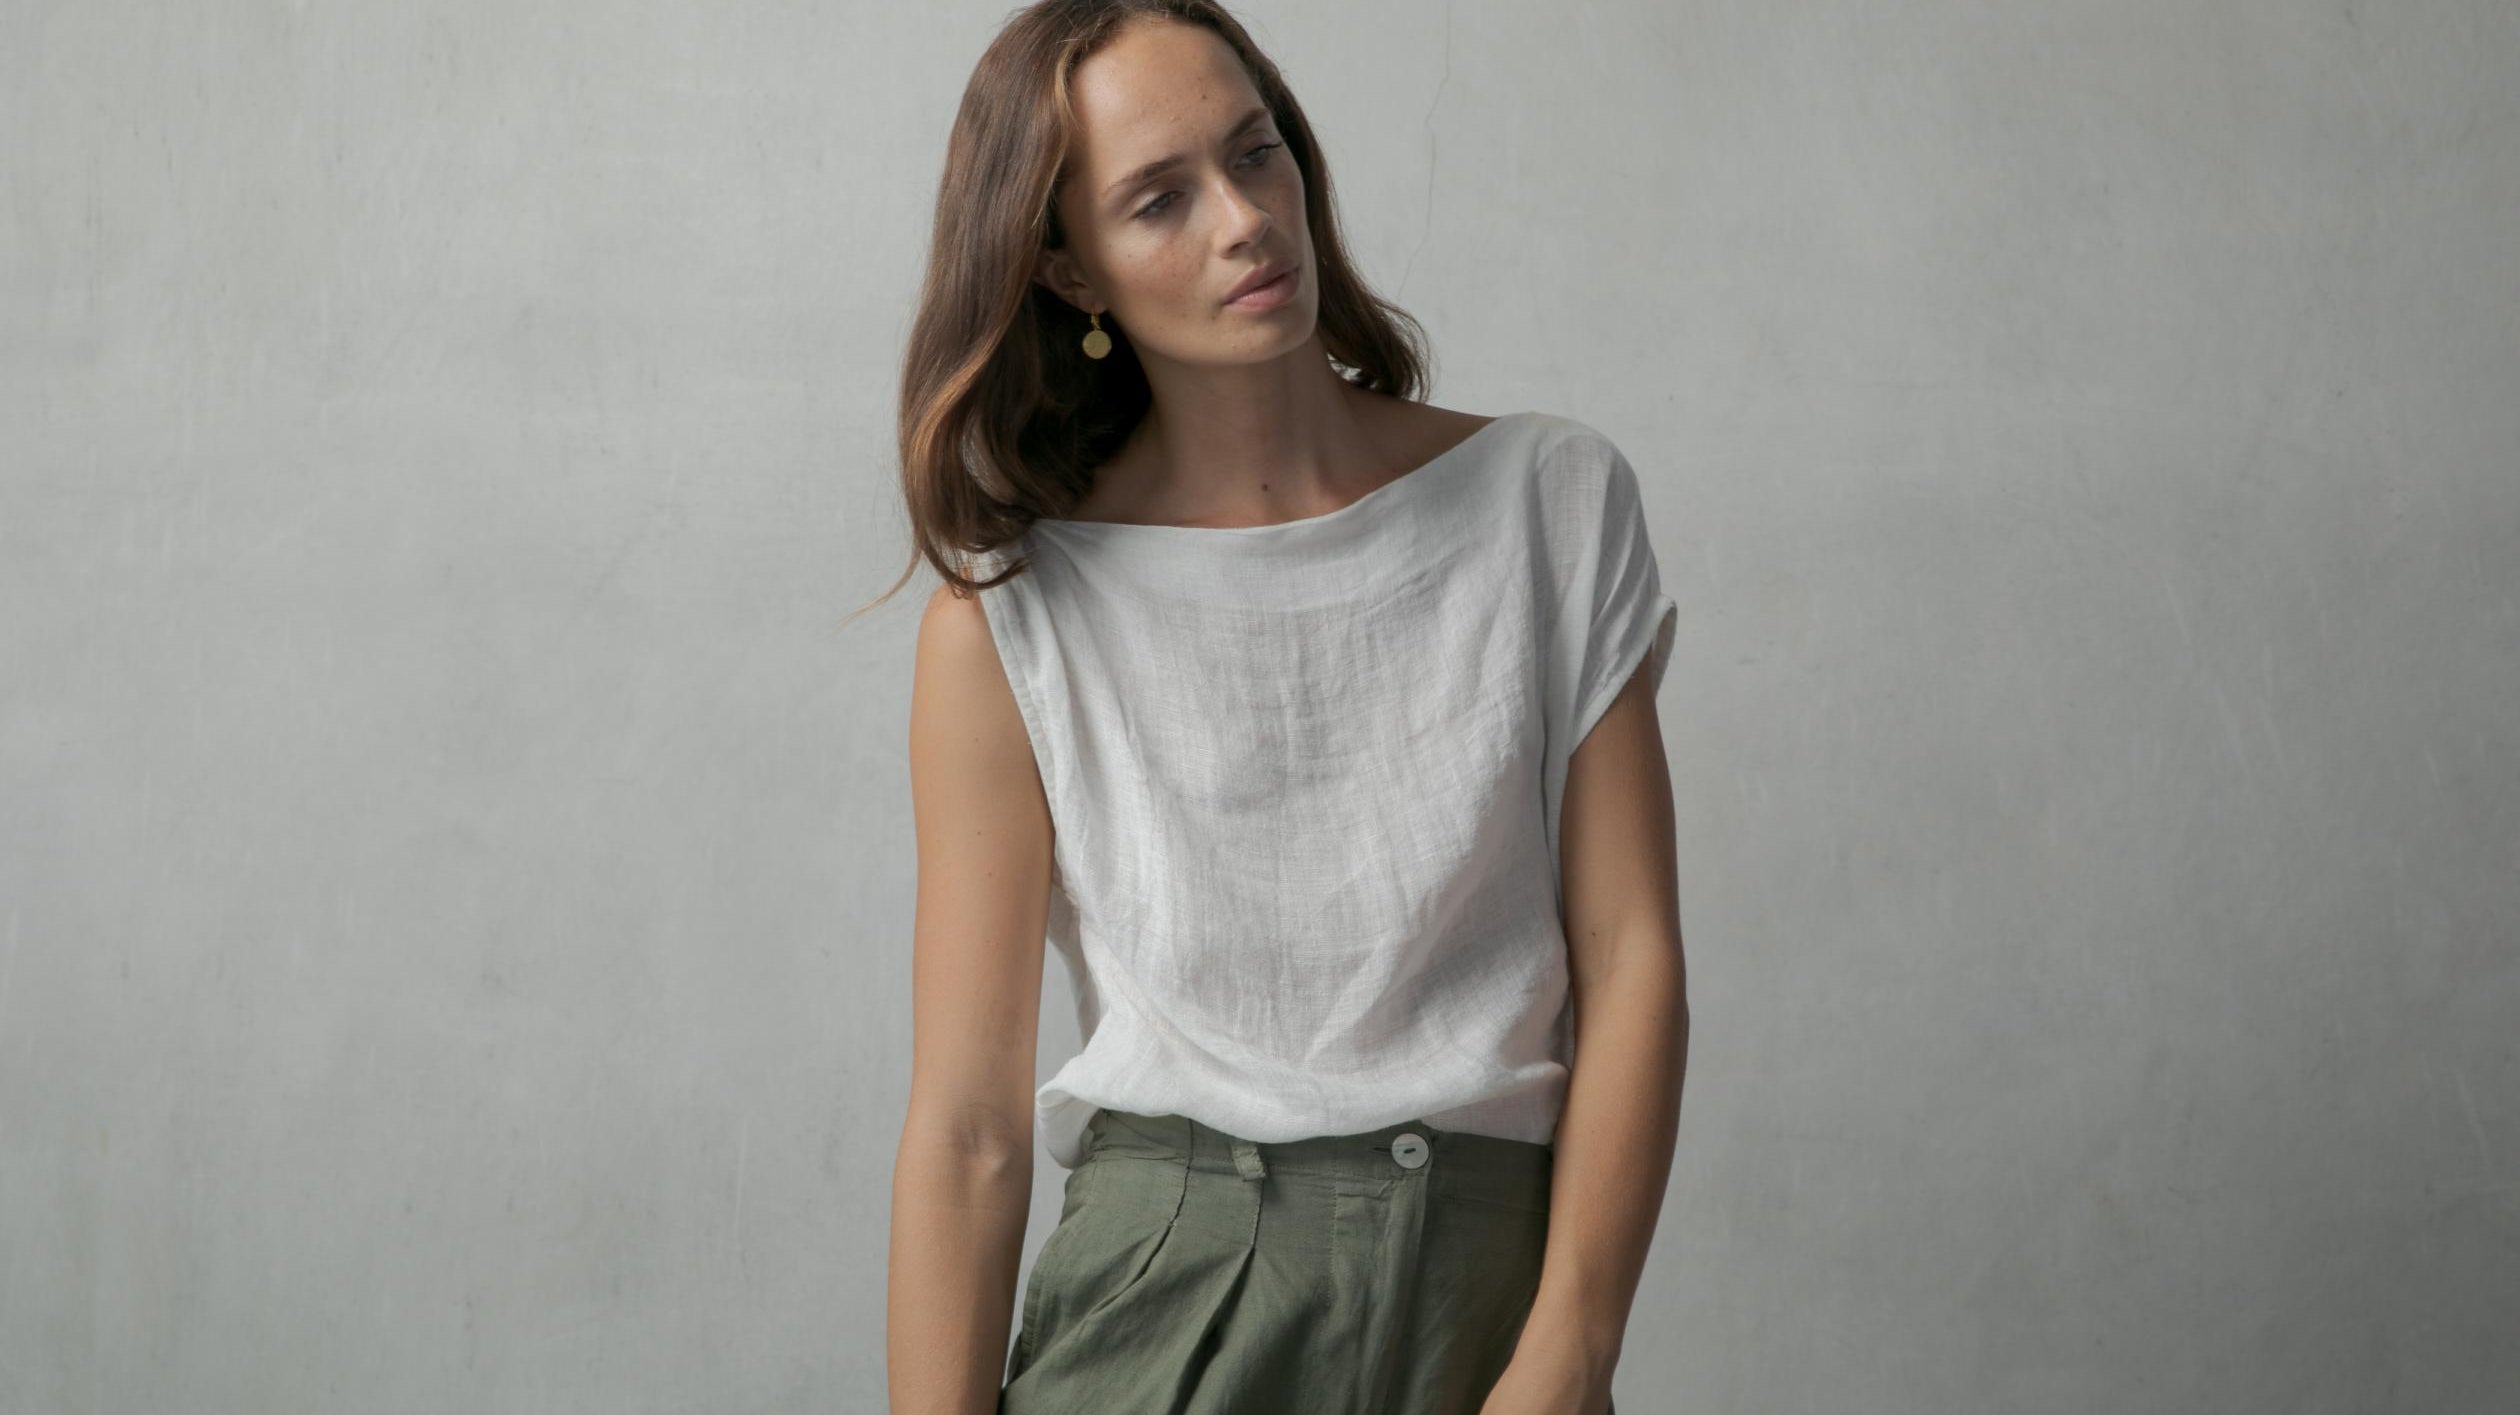 The-Perfect-Summer-Look-Elegant-Linen-Outfits-for-Women Luxmii